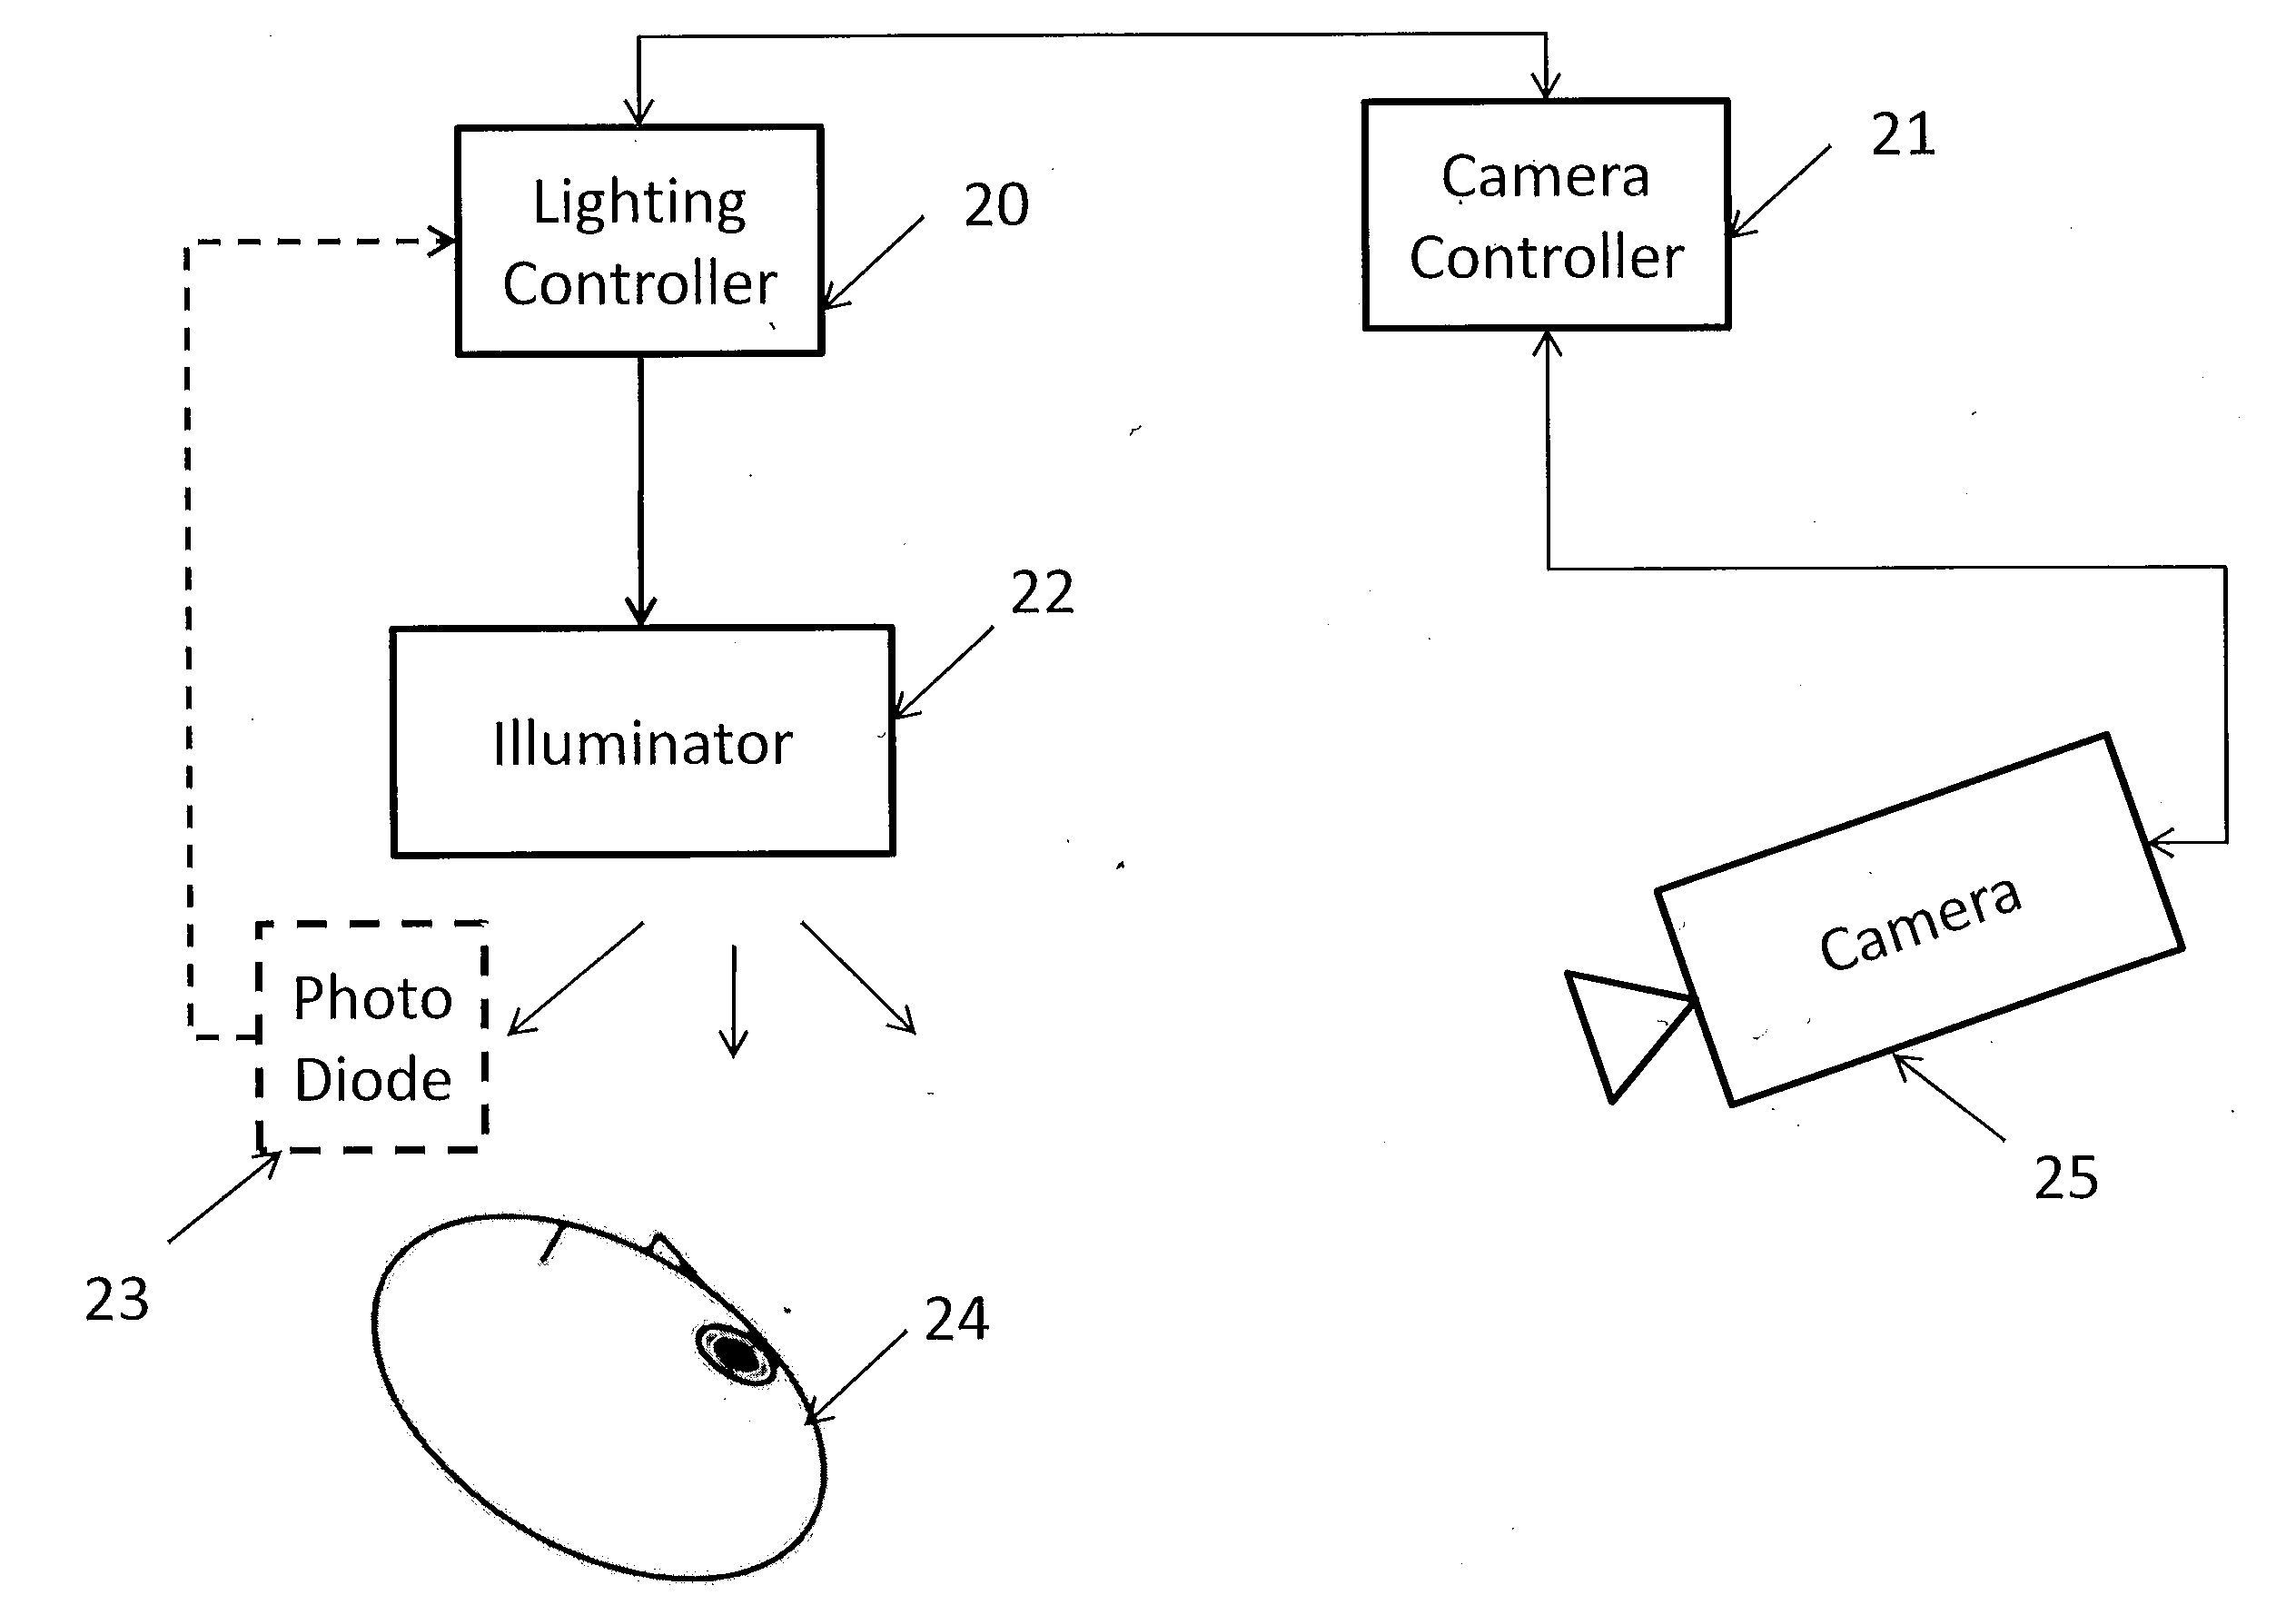 Method of Reducing Visibility of Pulsed Illumination While Acquiring High Quality Imagery